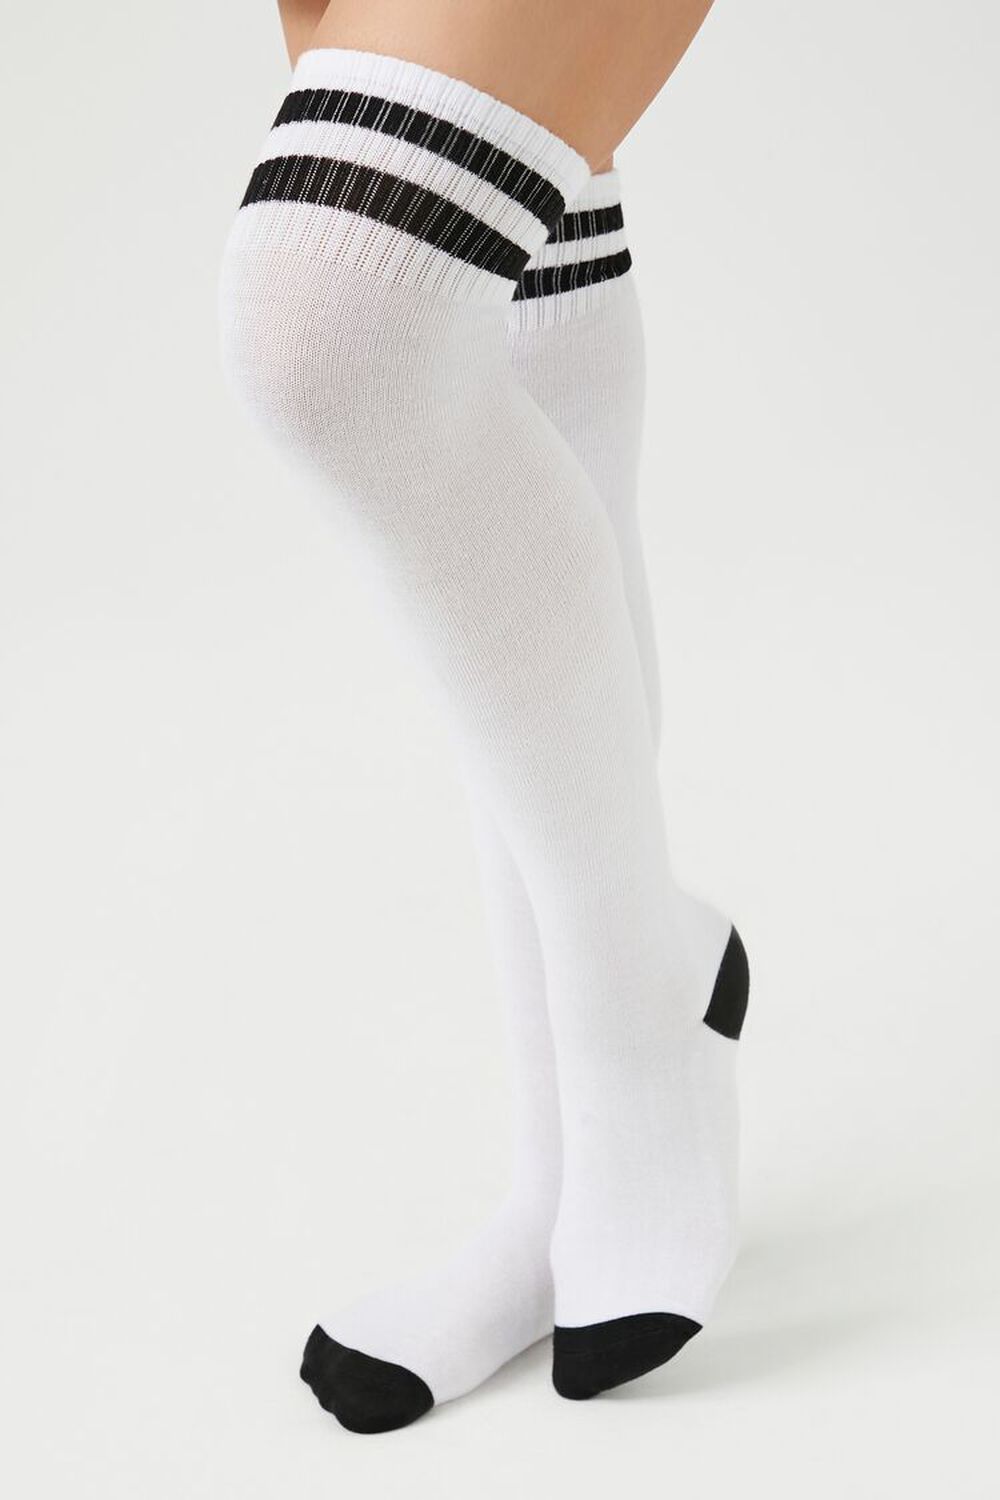 Forever 21 Women's Striped Over-The-Knee Socks in White/Black | Concert & Festival Clothes | Back to School Essentials | F21